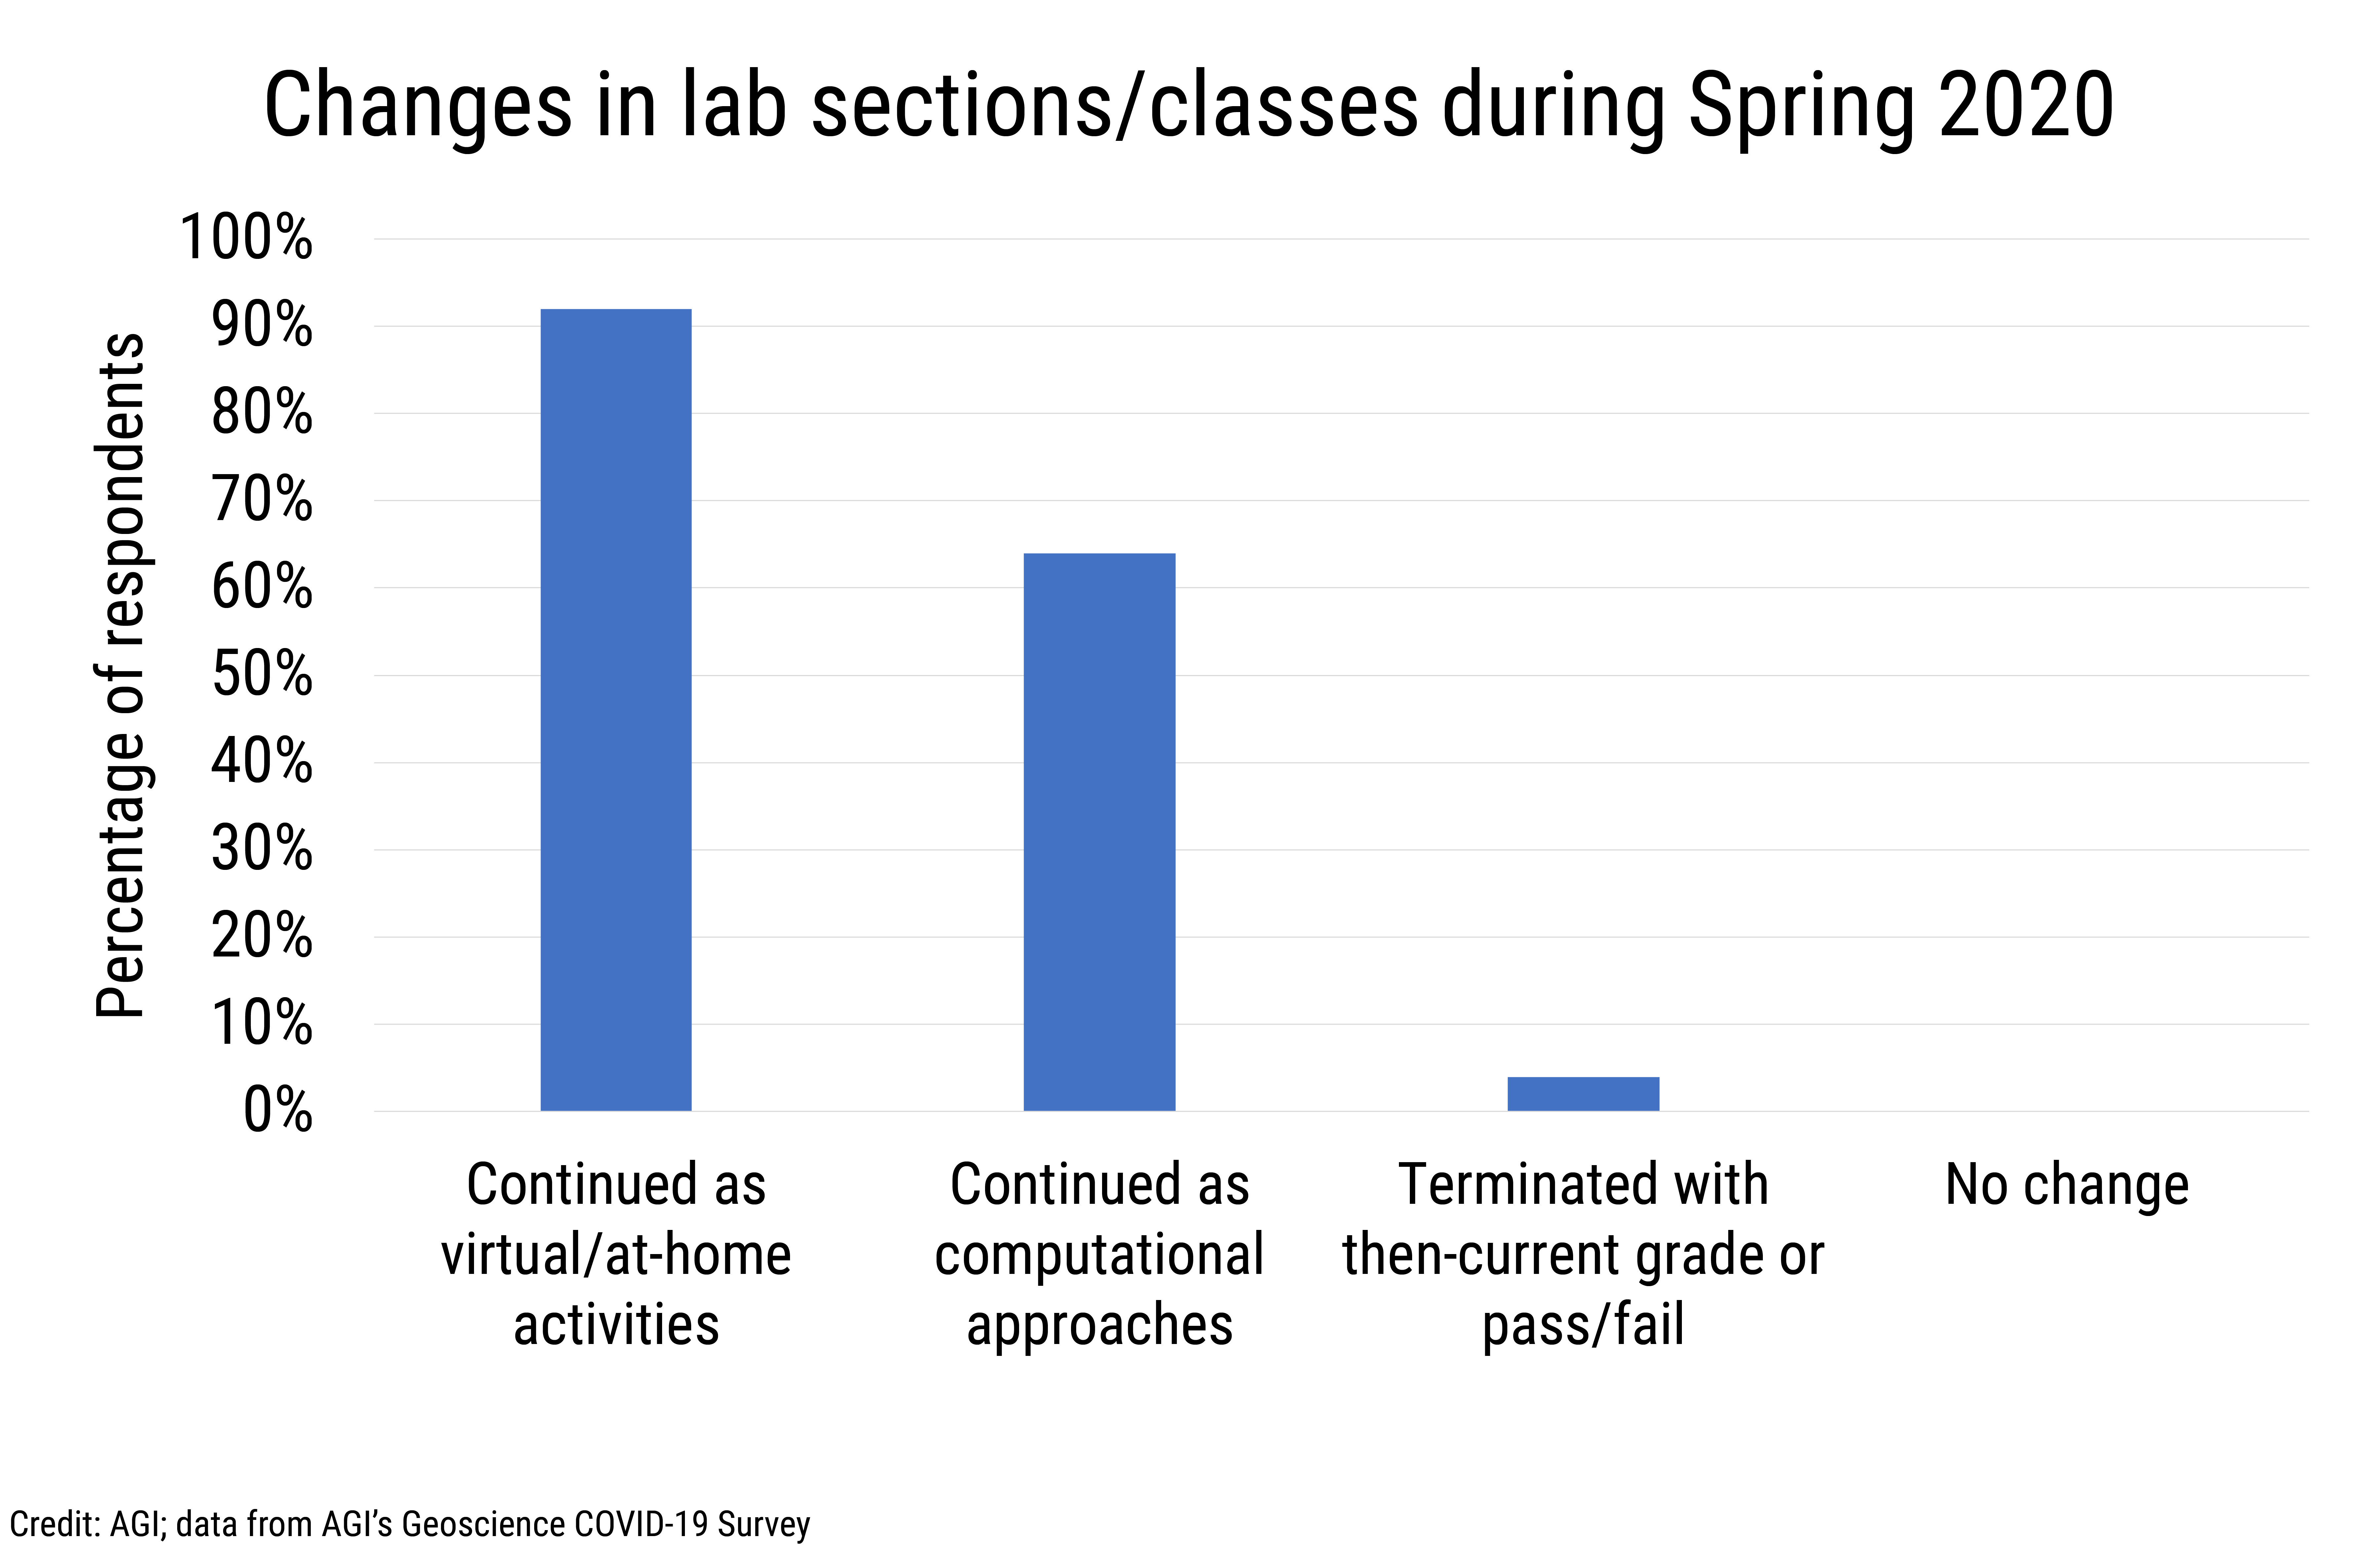 Data Brief 2020-006 chart 01: Changes in lab sections/classes during Spring 2020 (credit: AGI)